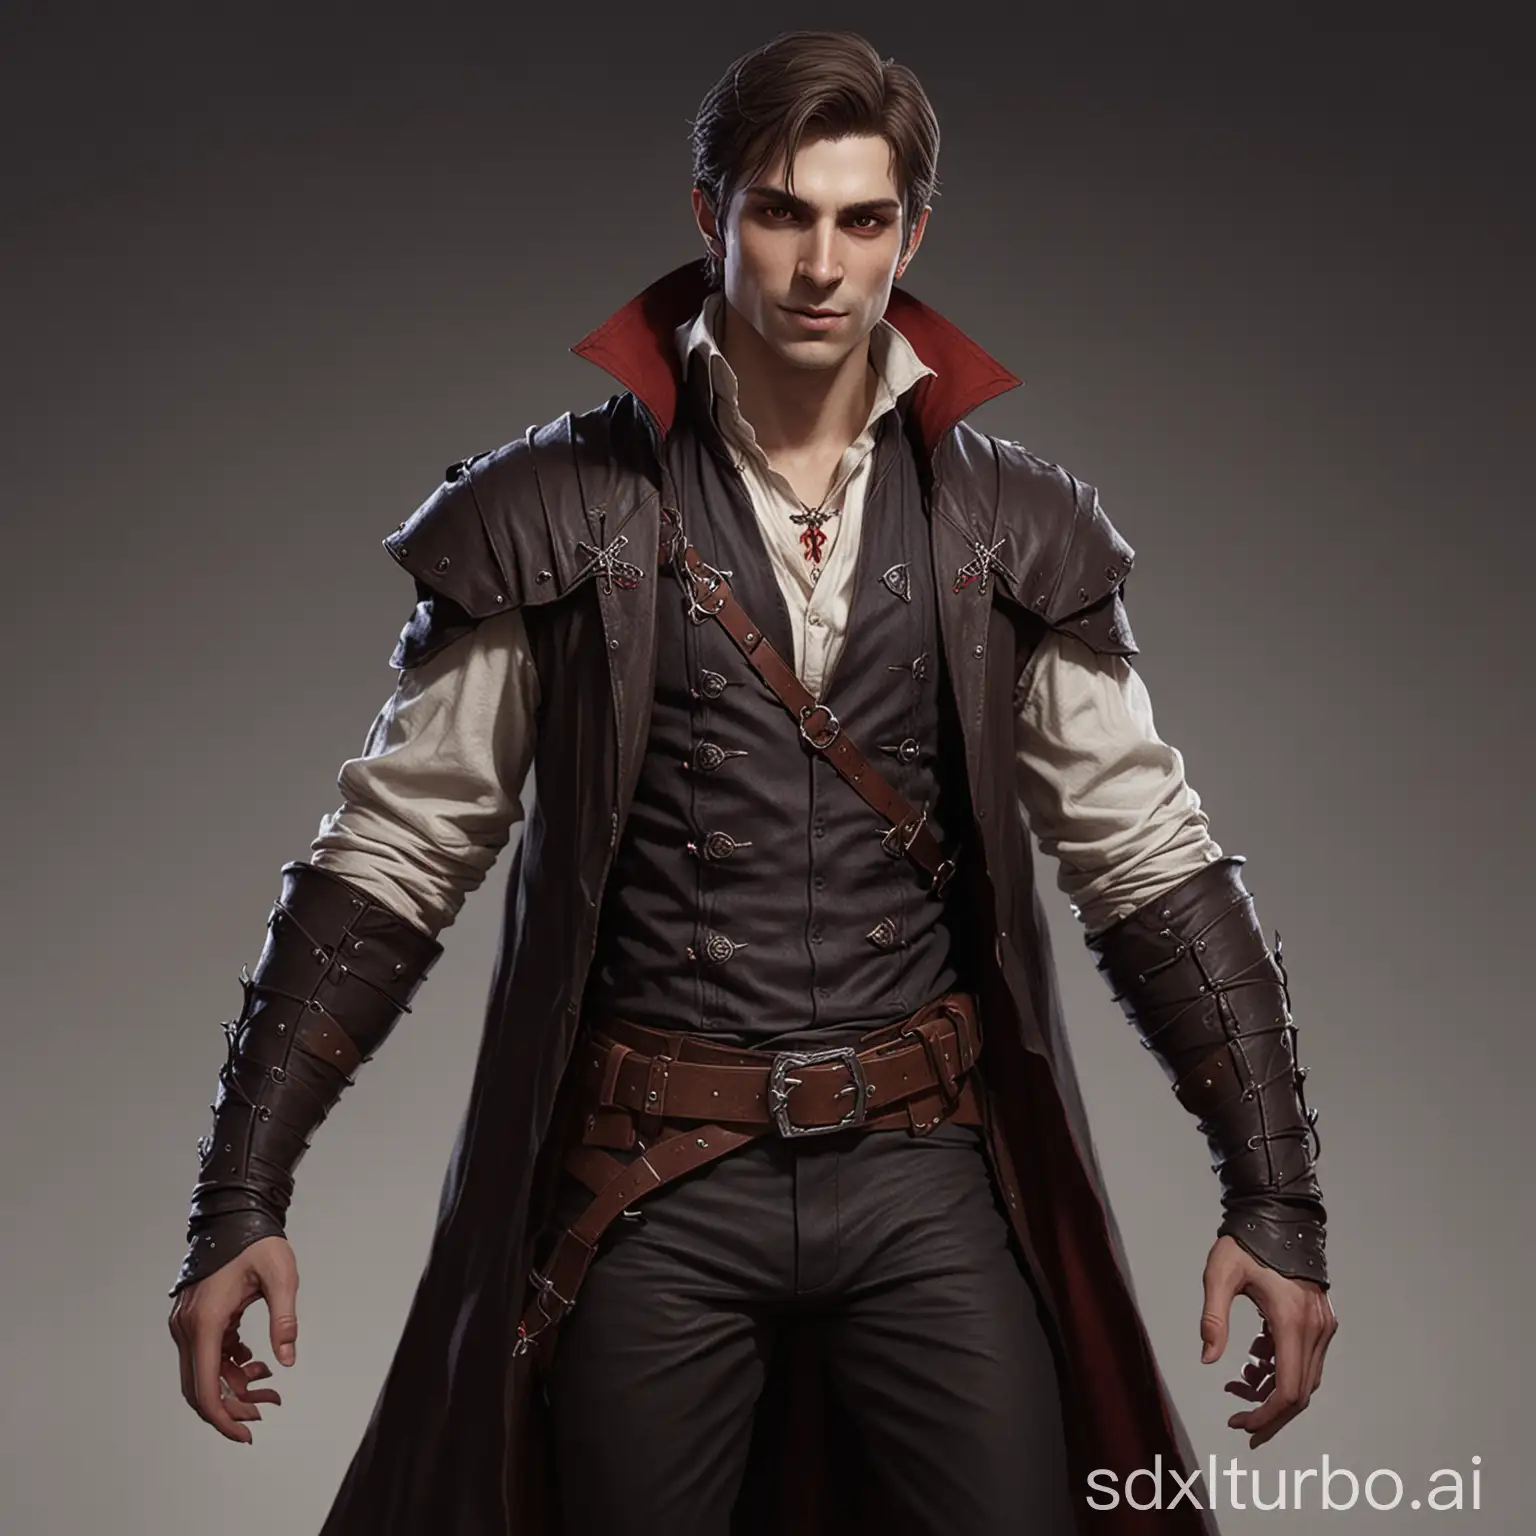 Tall-Male-Vampire-with-Brown-Hair-in-Dungeons-and-Dragons-Character-Pose